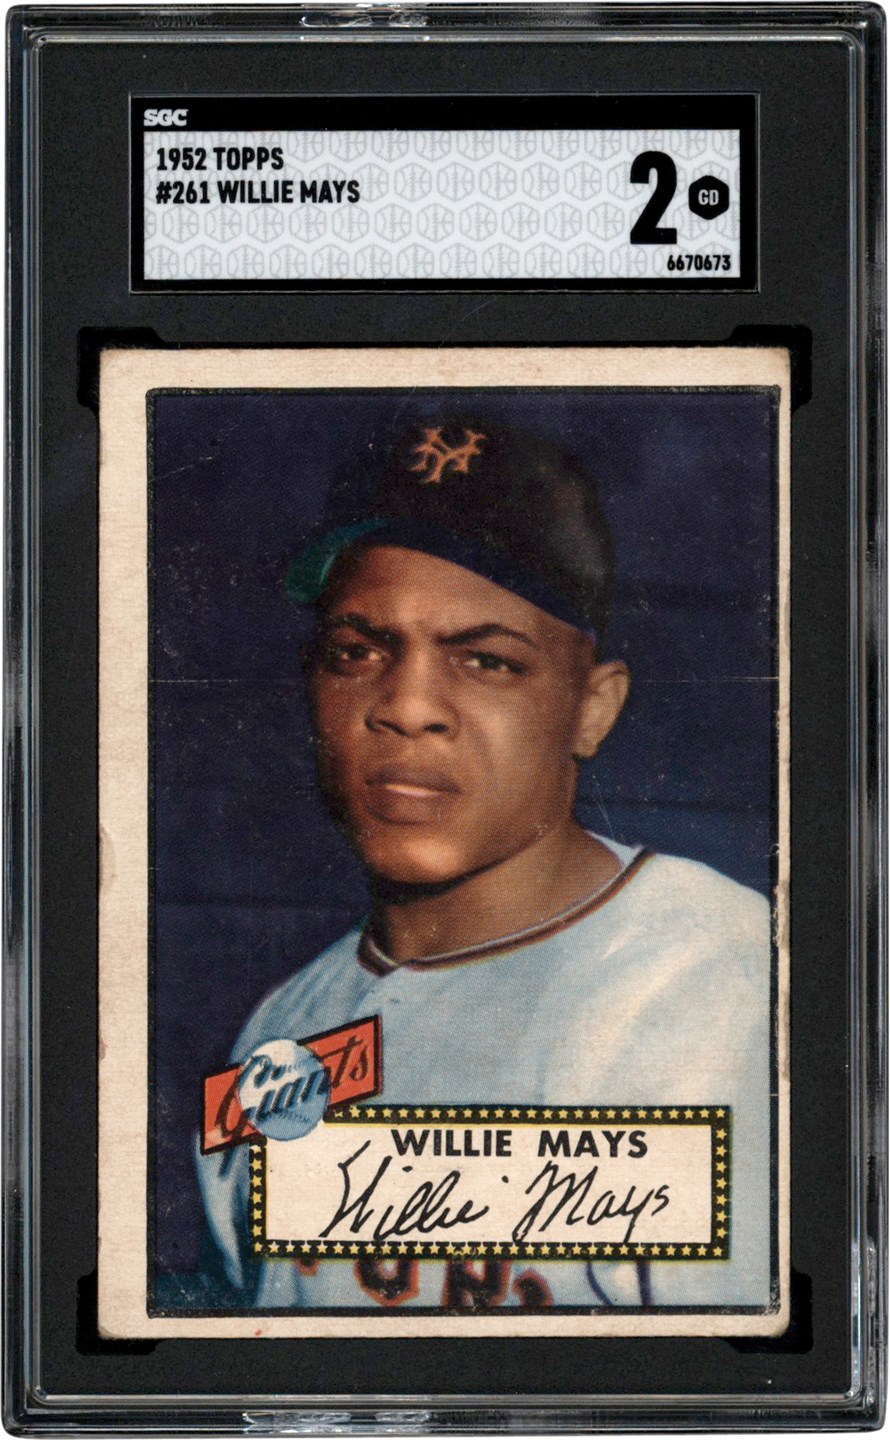 - 1952 Topps #261 Willie Mays SGC GD 2